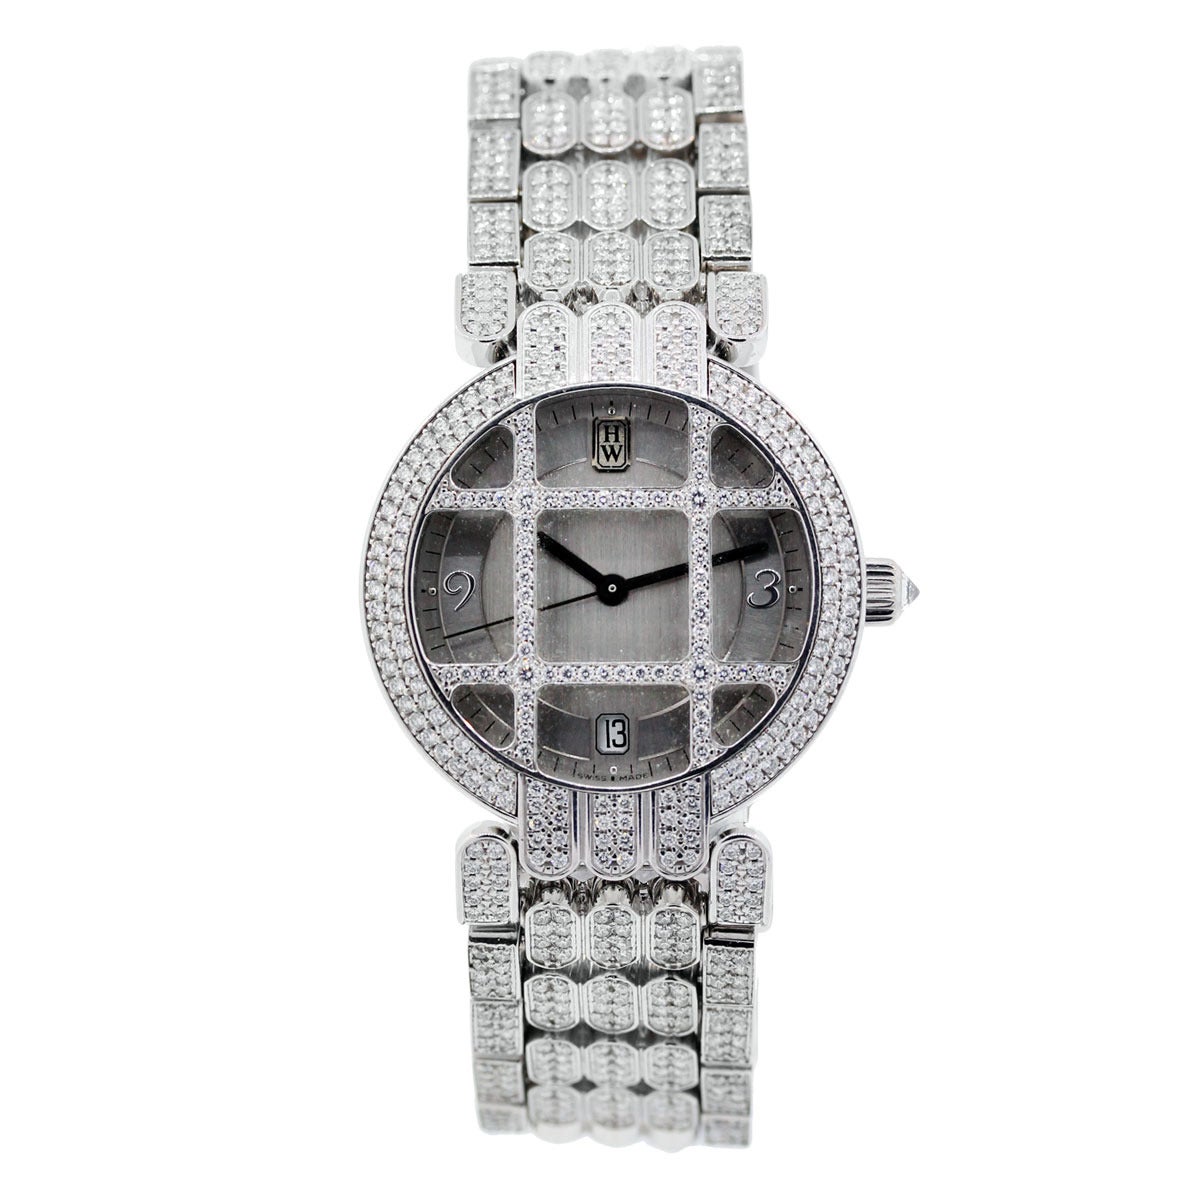 Brand: Harry Winston
Style: Premier
Case Material : 18k White Gold
Case Diameter: 36mm
Bezel: 18k White Gold with Diamonds
Dial: Silvered Dial with silver Hands; Date at 6 o'clock; Diamond-set Grill
Clasp : Double Fold over clasp
Bracelet: 5